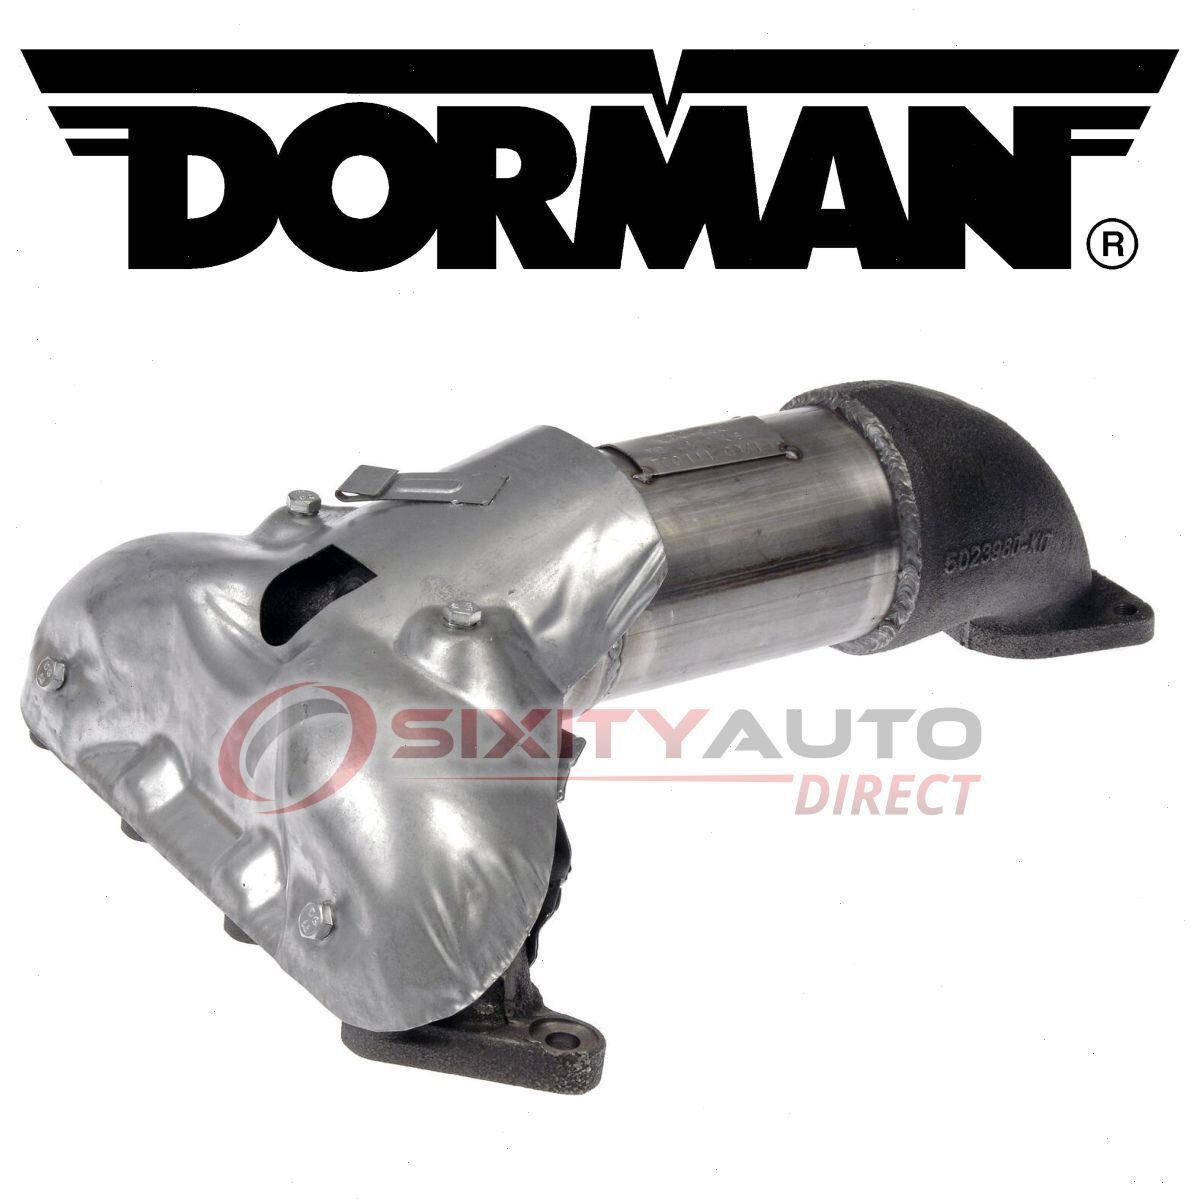 Dorman 674-960 Exhaust Manifold w Catalytic Converter for 51650 2851023980 wy